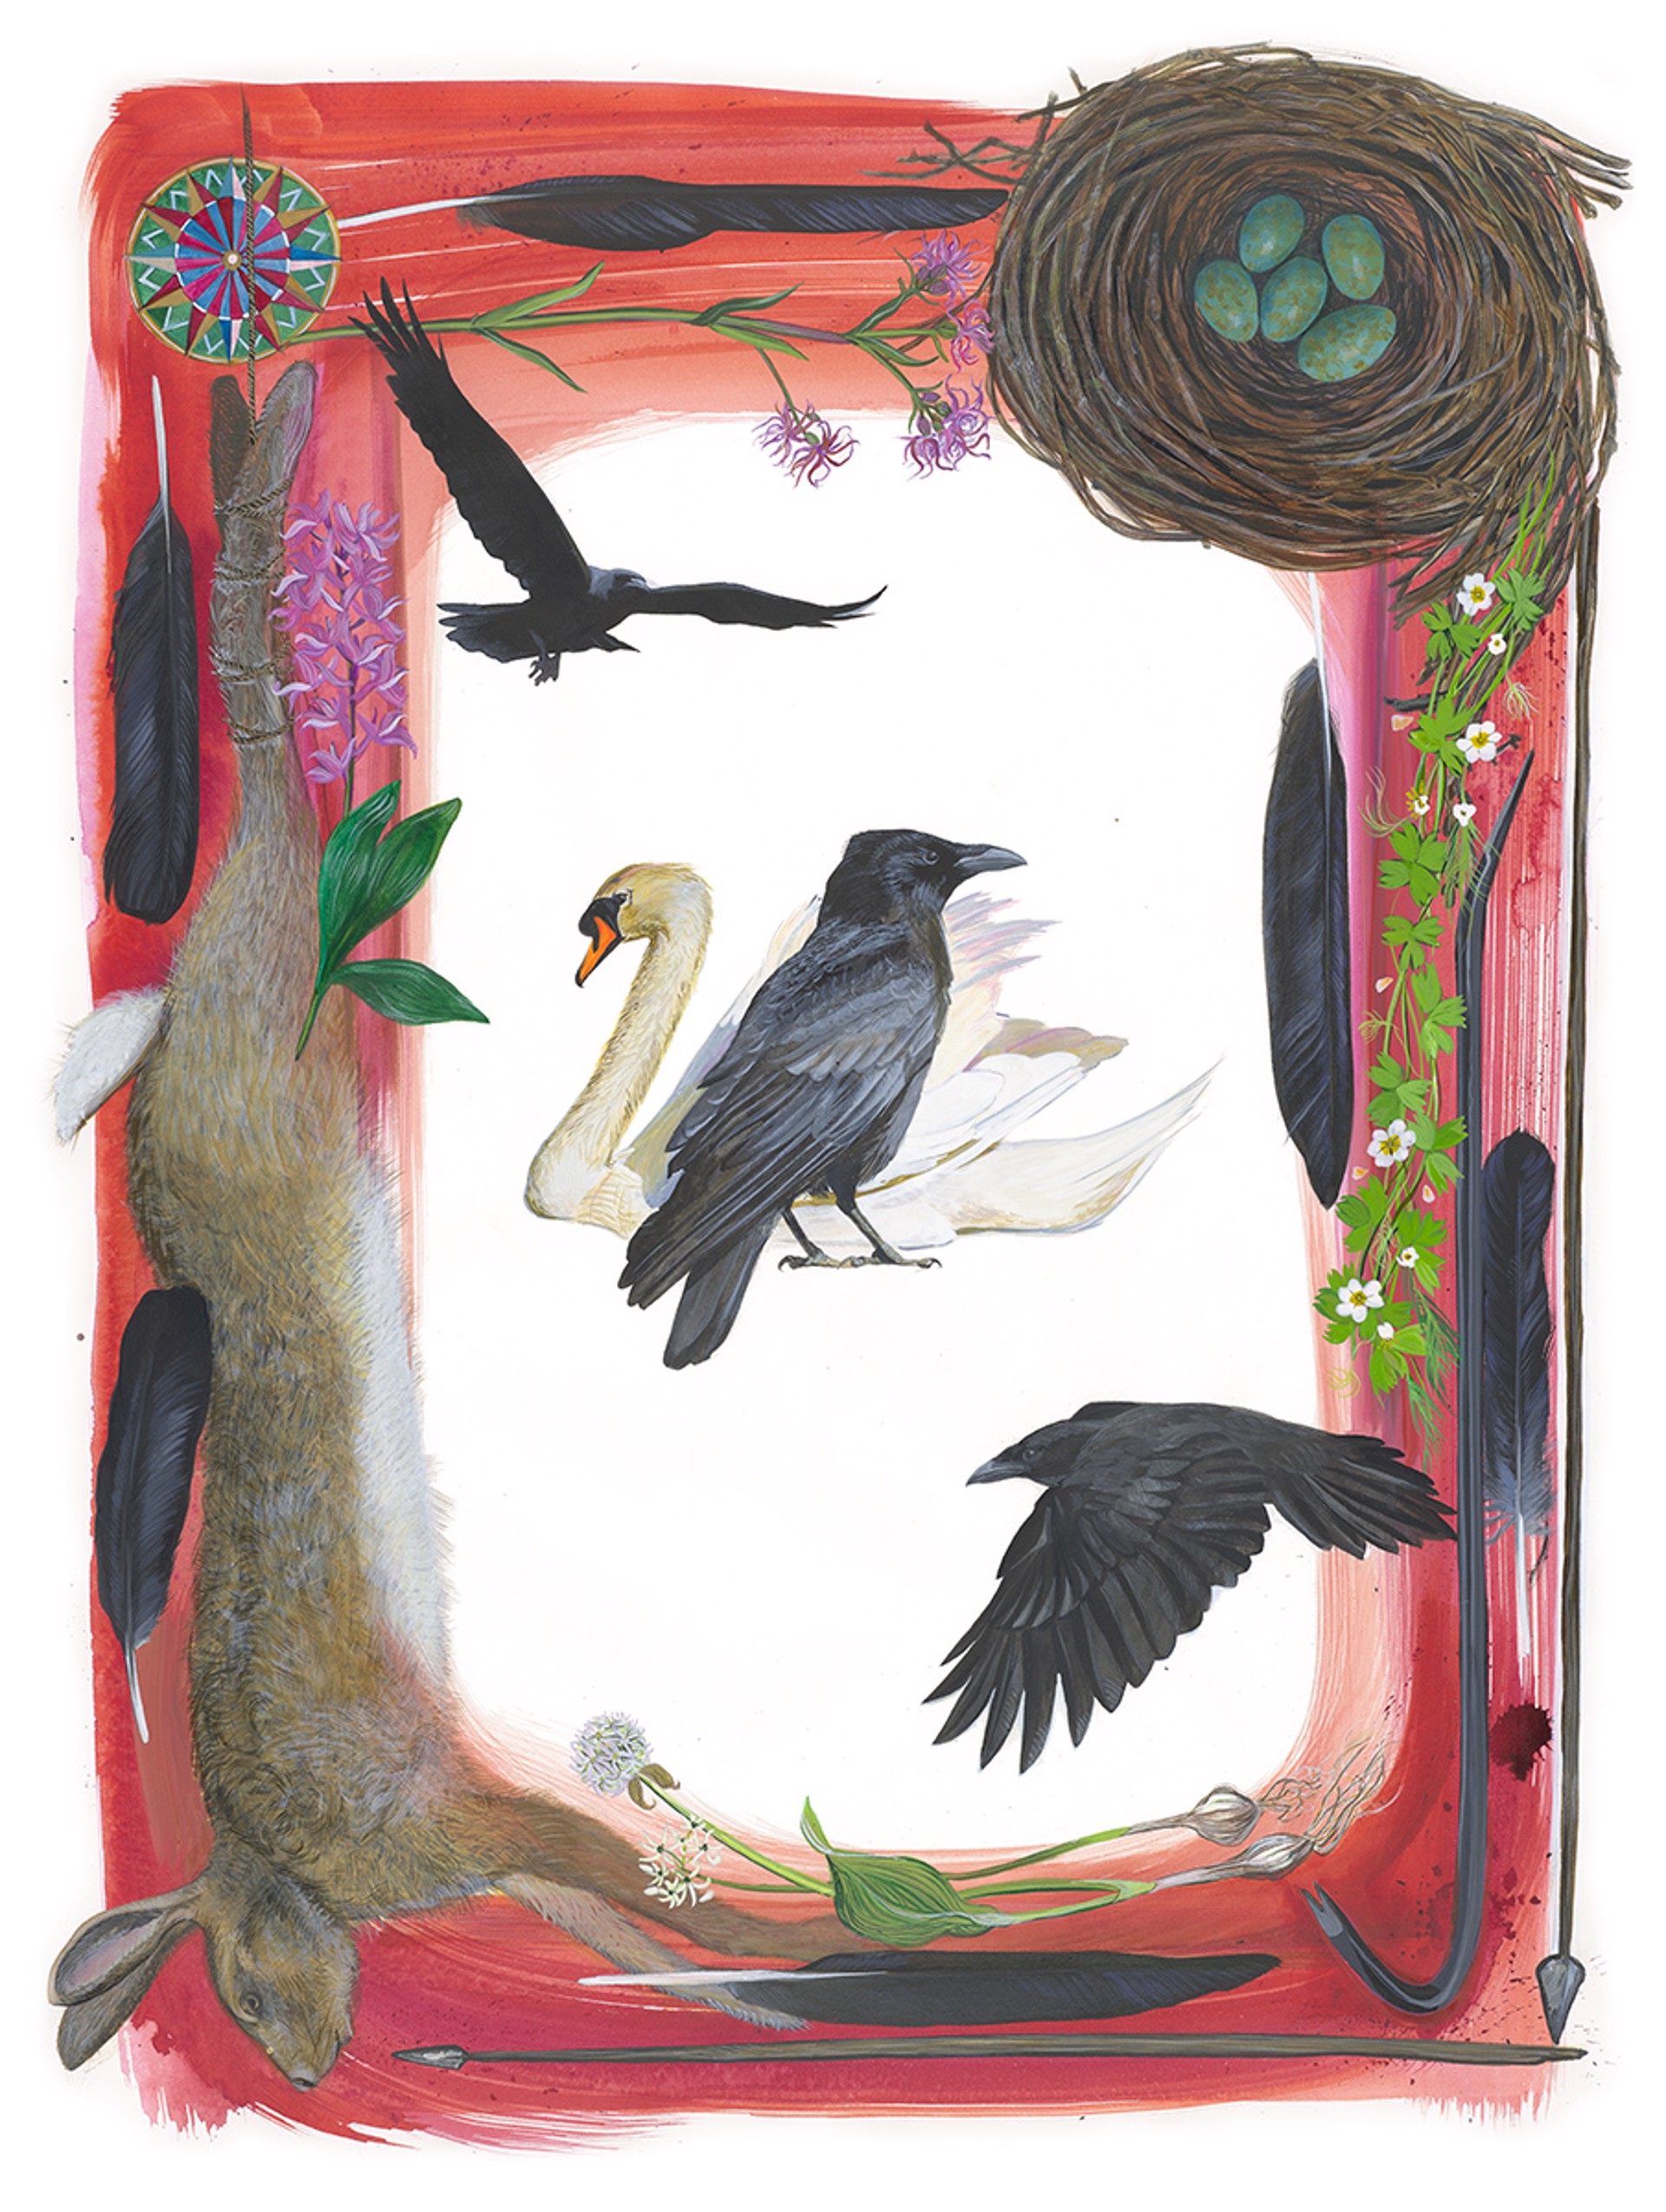 Birds of Shakespeare: Carrion Crow (Corvus corone) by Missy Dunaway